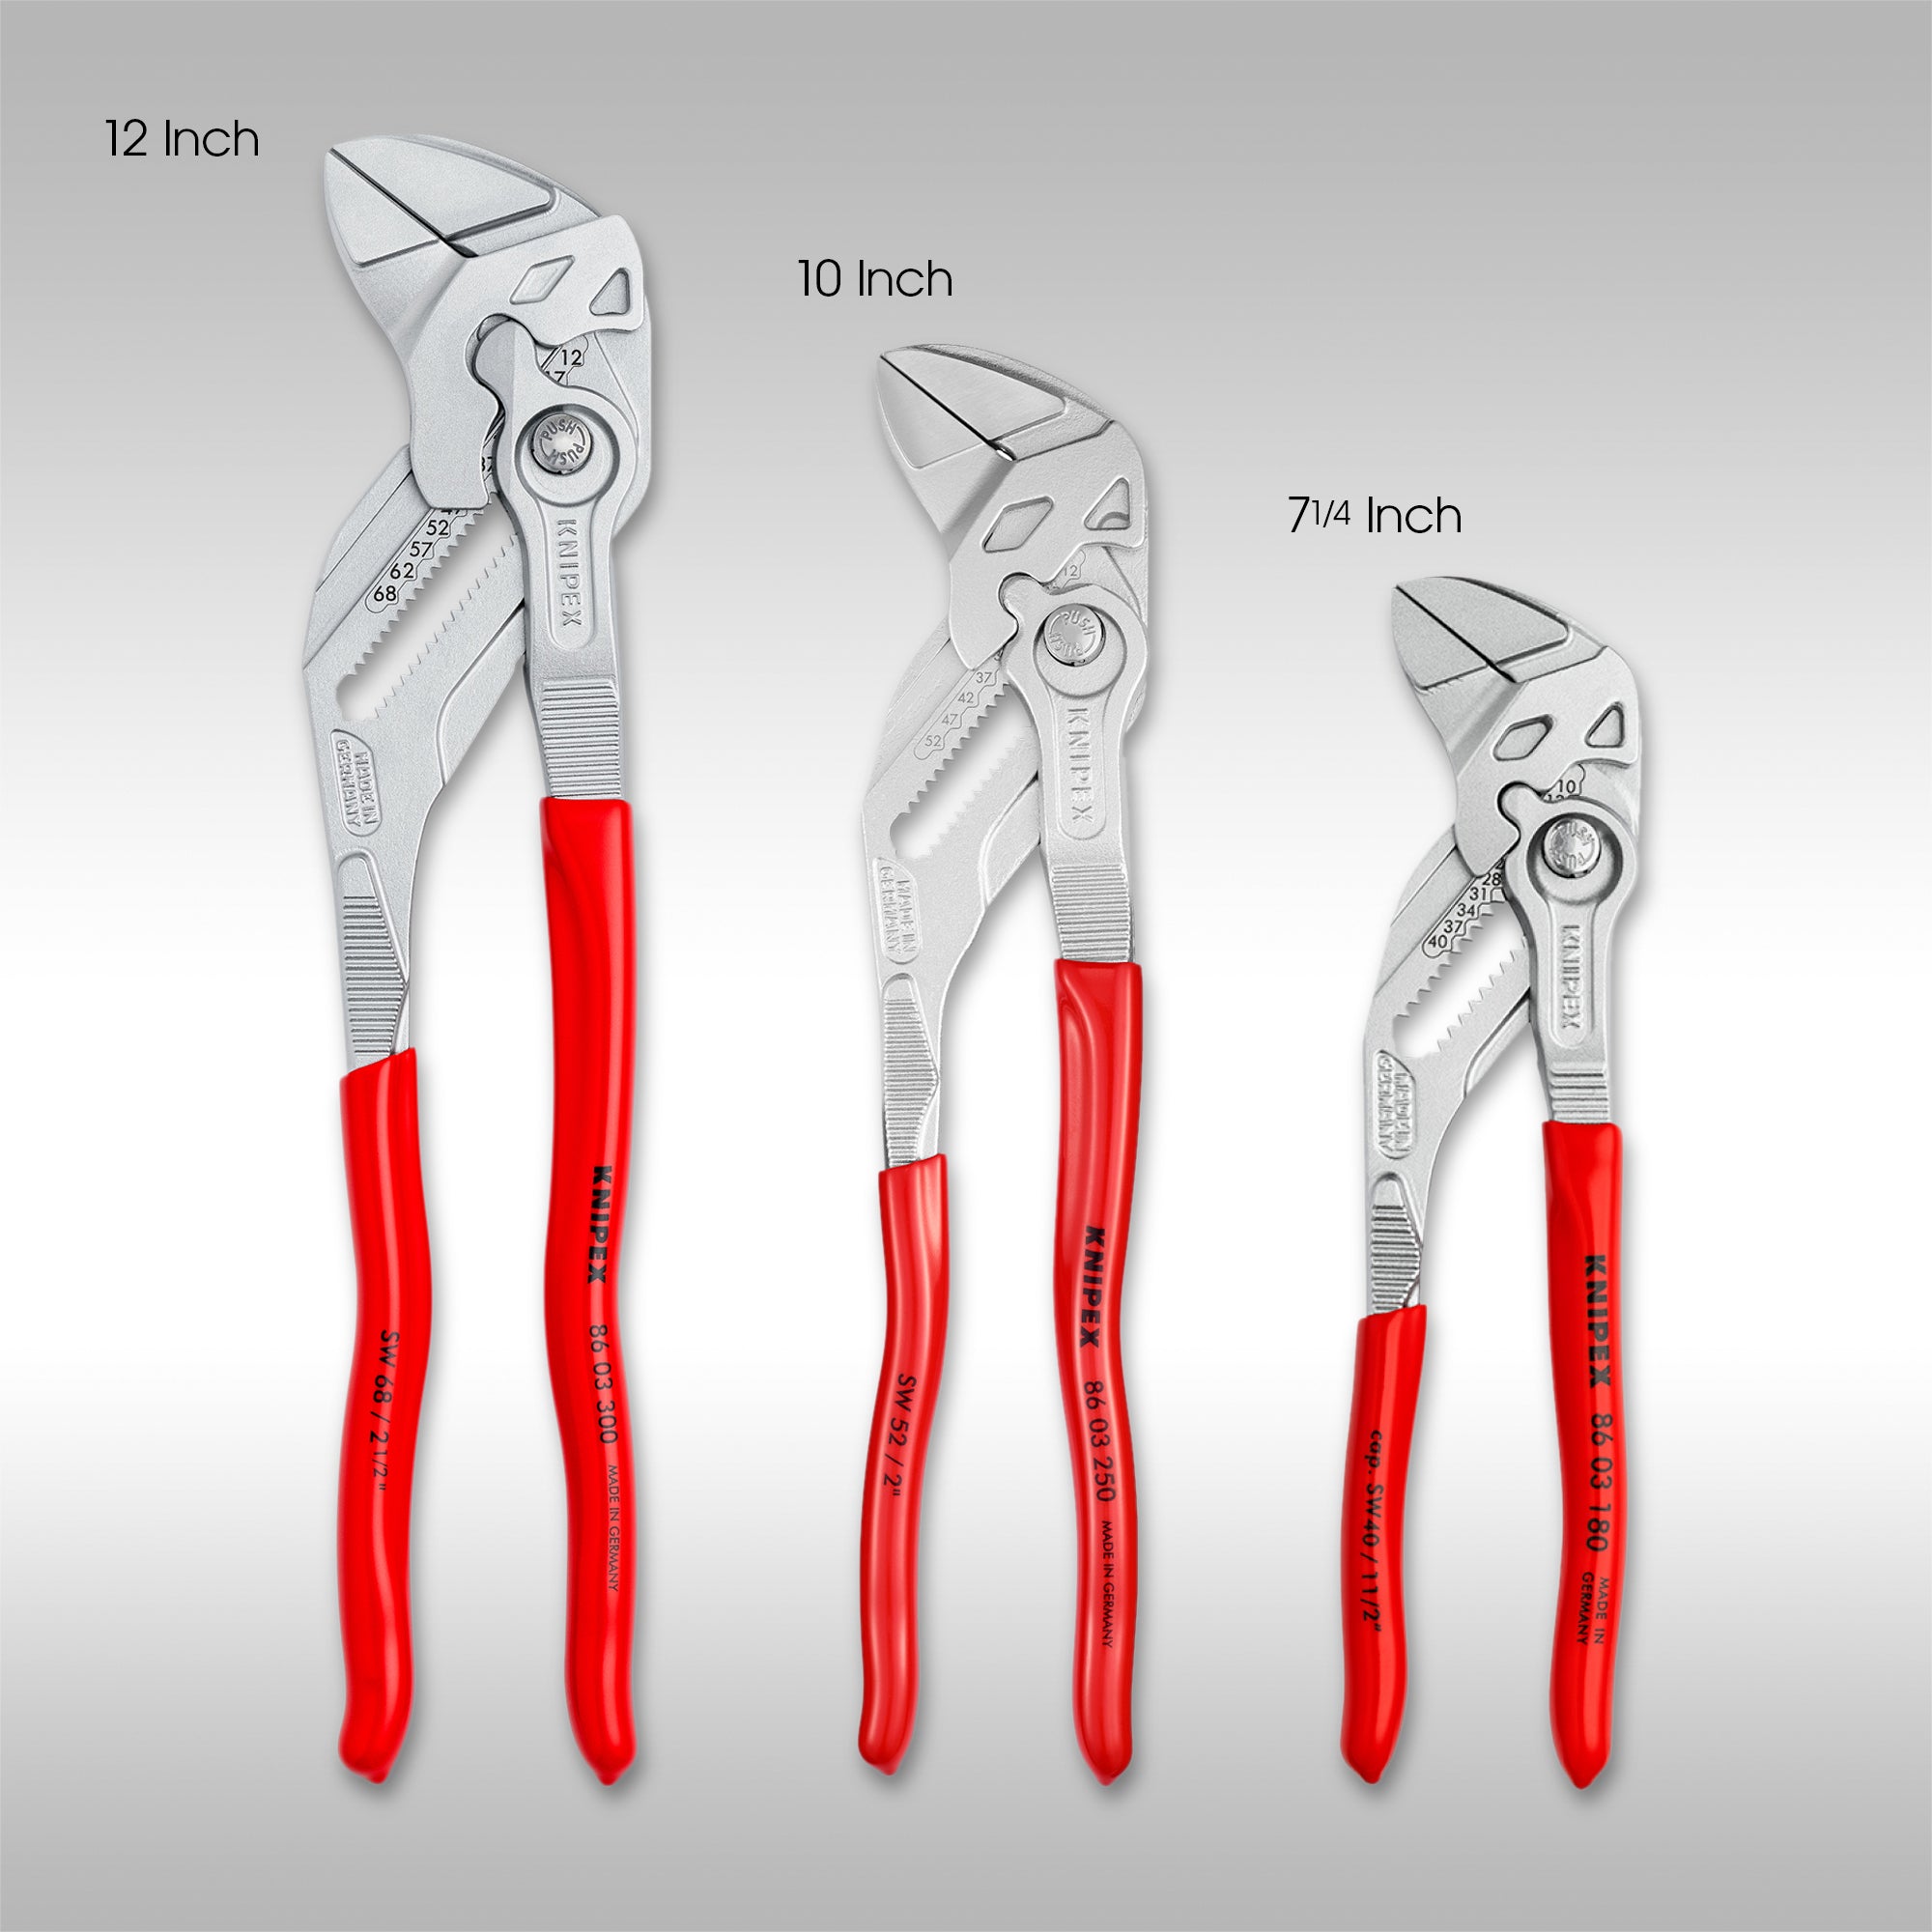 KNIPEX - 3PC PLIERS WRENCH SET - 7 1/4, 10, 12 - Upshift Online